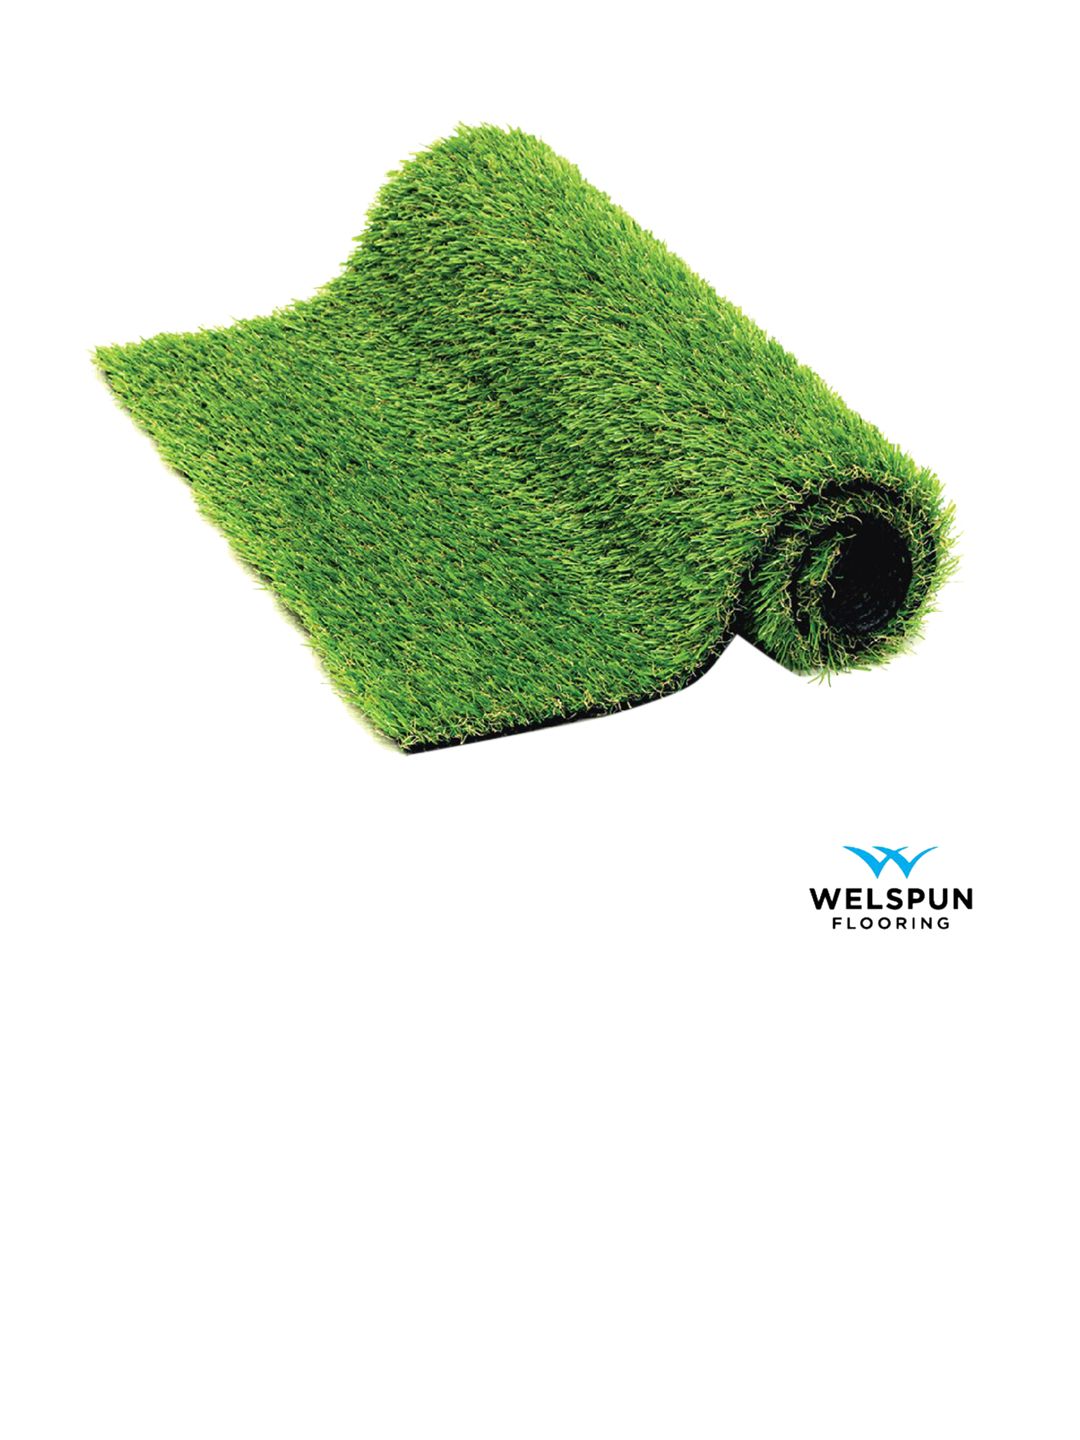 Welspun Green Highly Durable Grass Mat Price in India